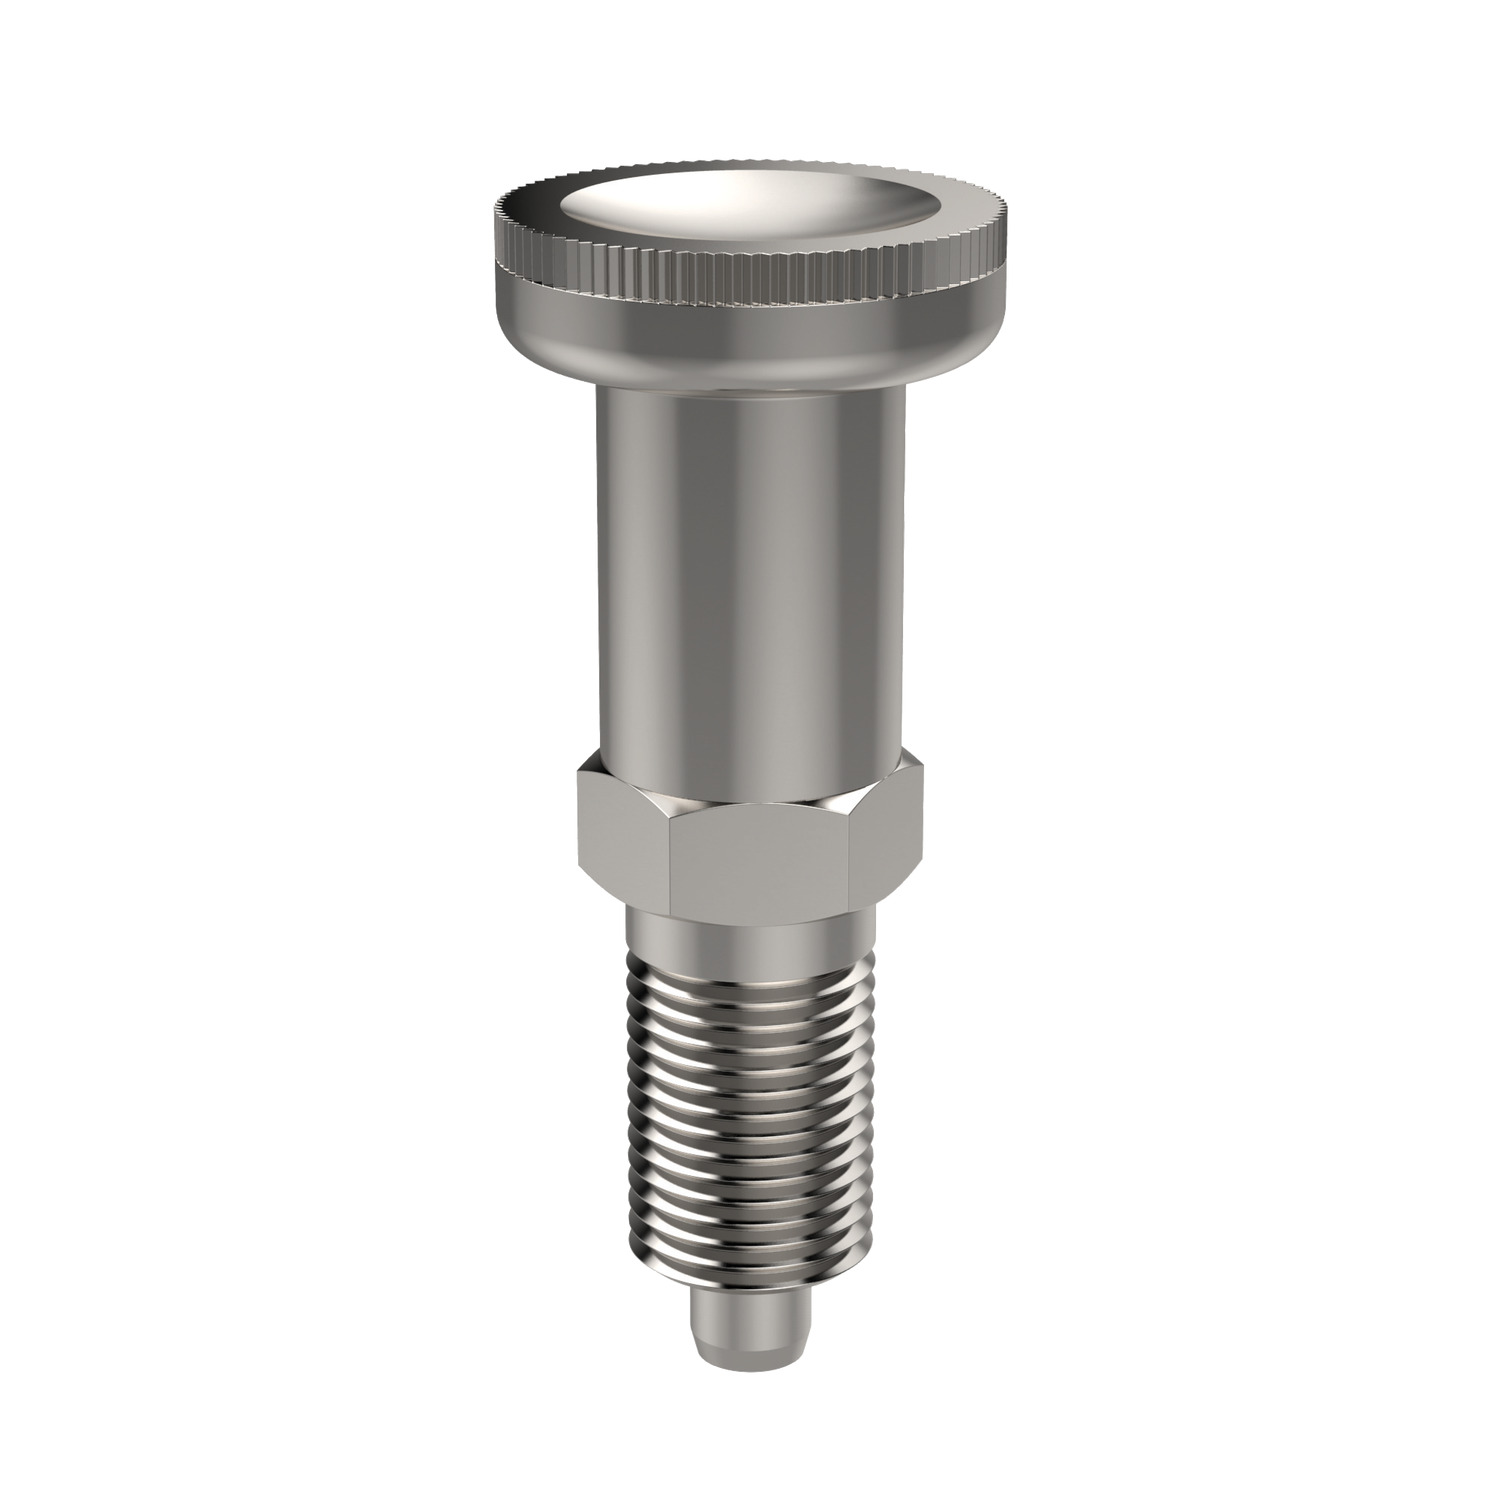 Index Plungers - Pull Grip Fully stainless steel non-locking index plunger. This corrosion-resistant construction makes it suitable for the demands of food processing, pharmaceutical or water treatment applications.